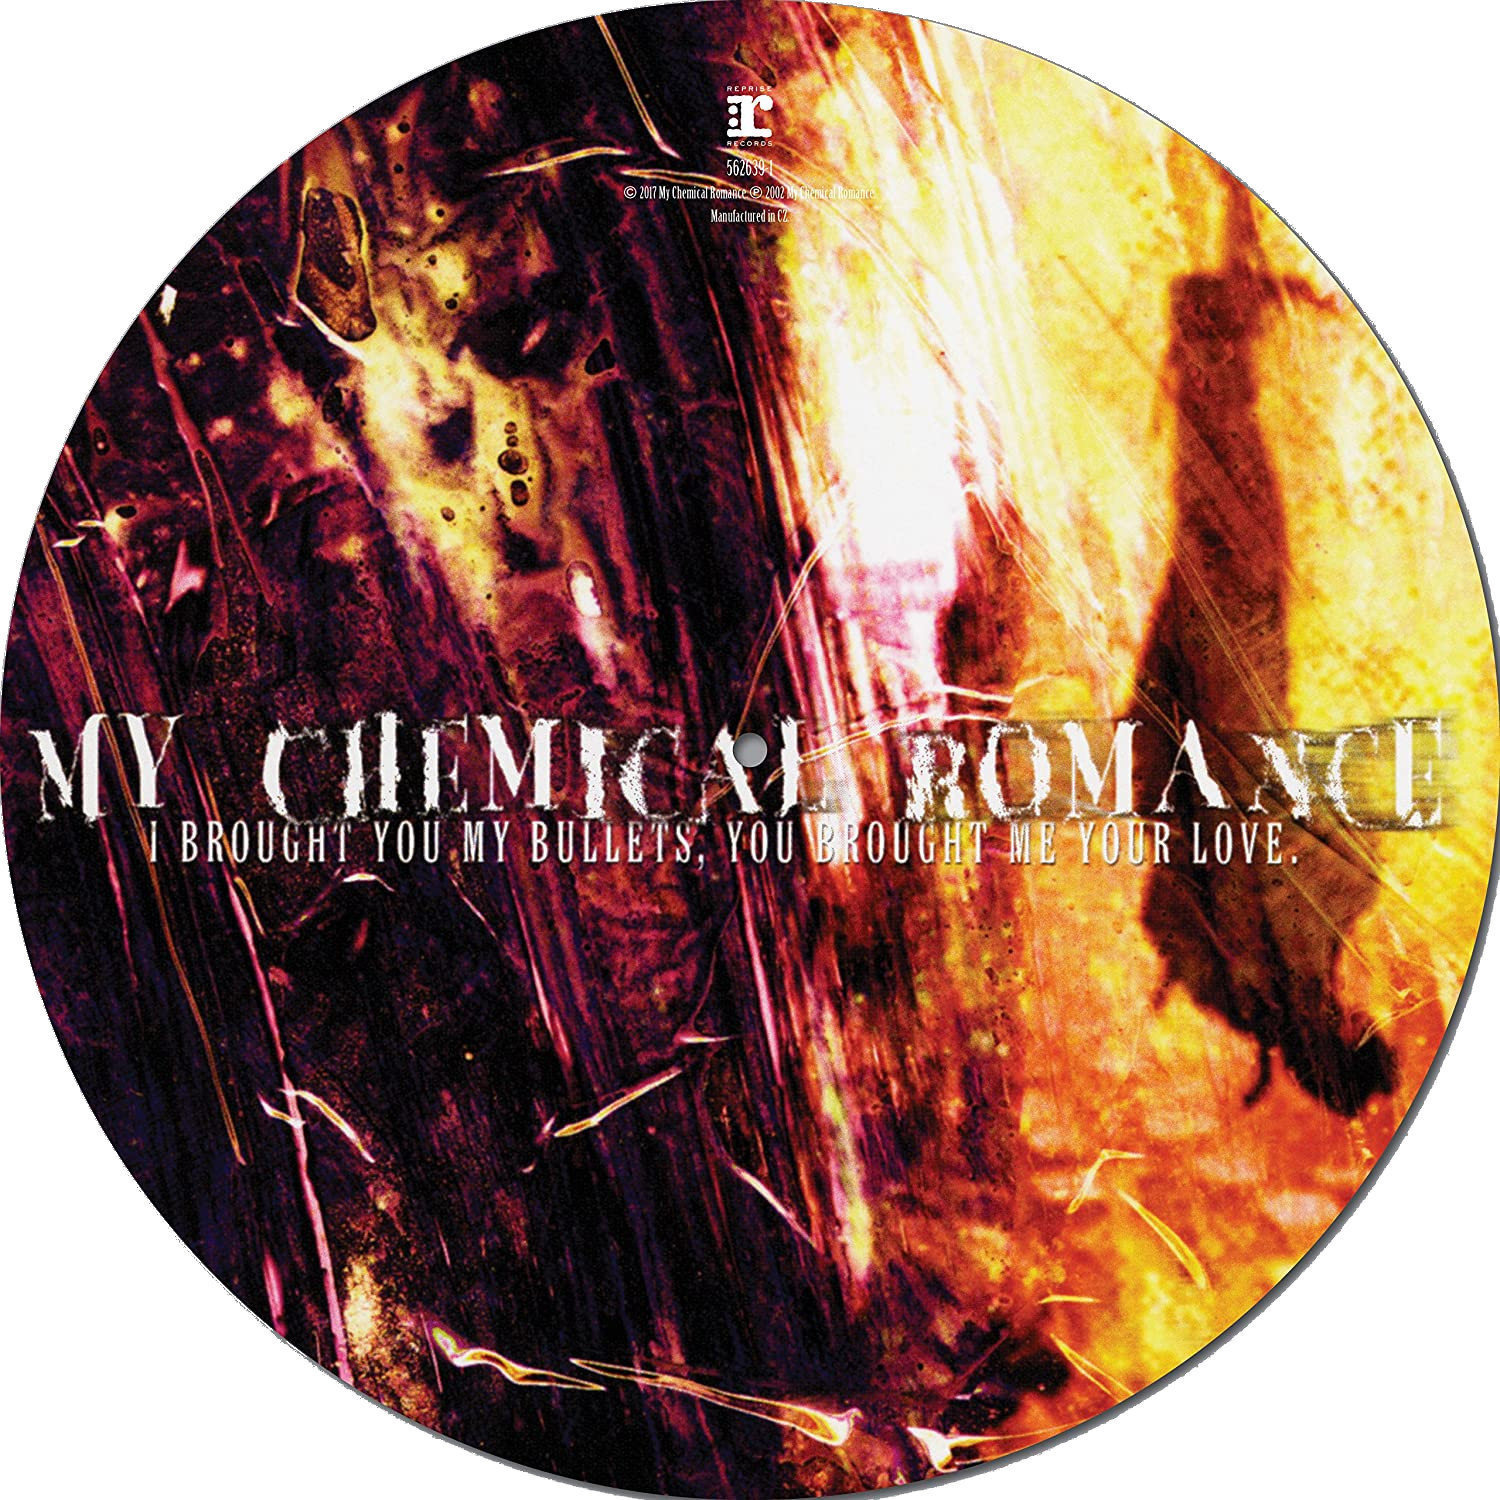 Vinyl Record My Chemical Romance - I Brought You My Bullets, You Brought Me Your Love (Picture Disc) (LP)